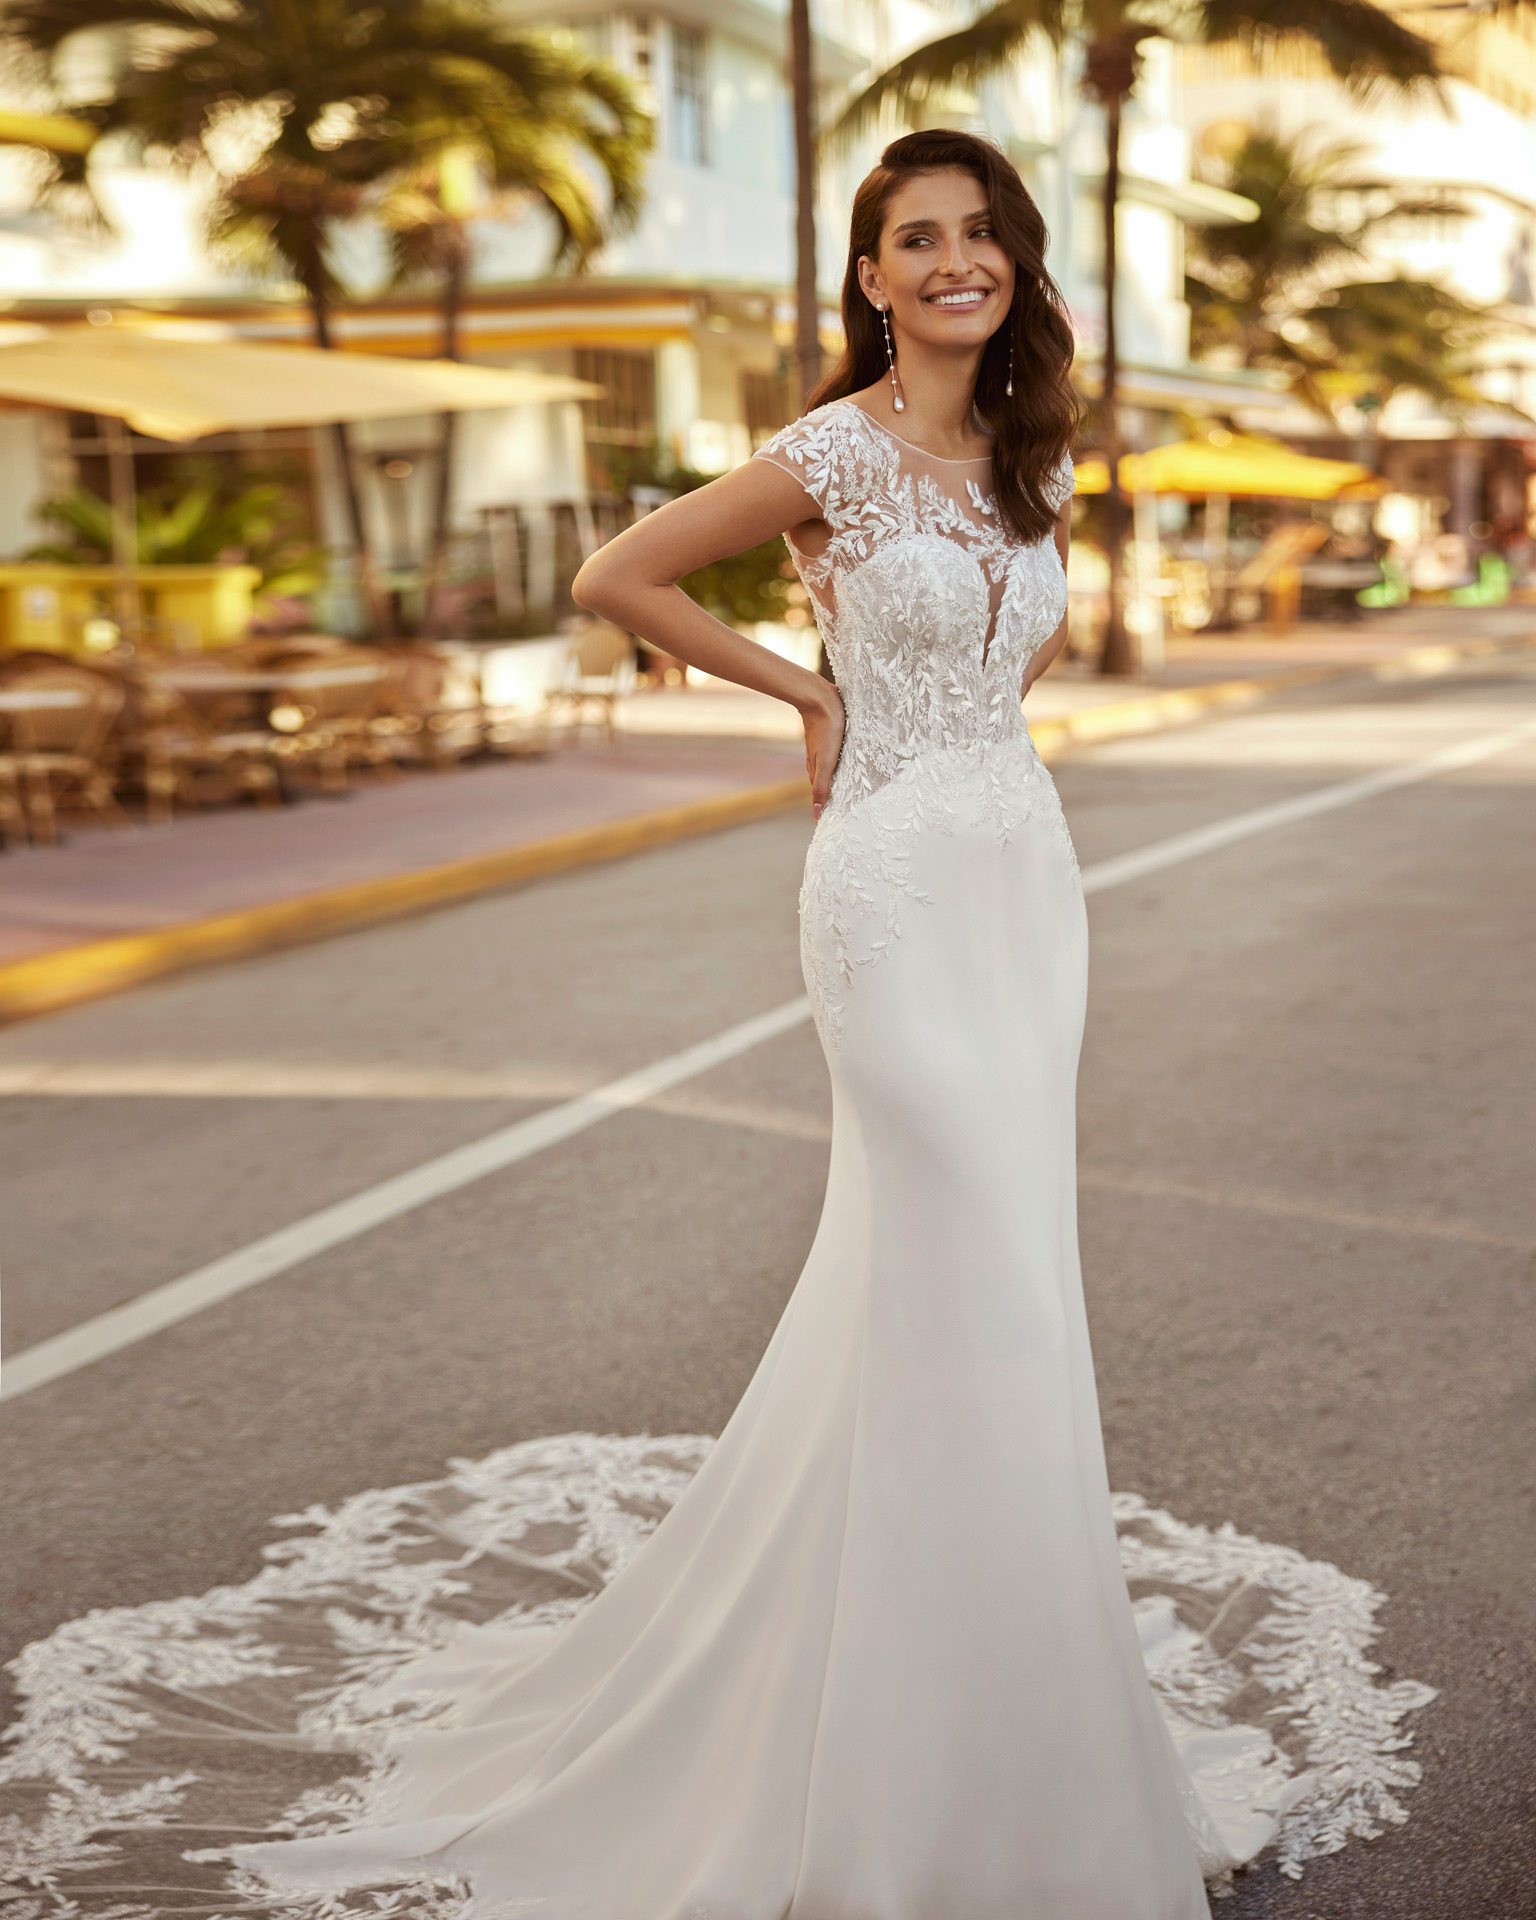 Sexy mermaid wedding dress, made in crepe combined with lace. This delicate Luna Novias design features a V-neckline, open back and short sleeves. LUNA_NOVIAS.